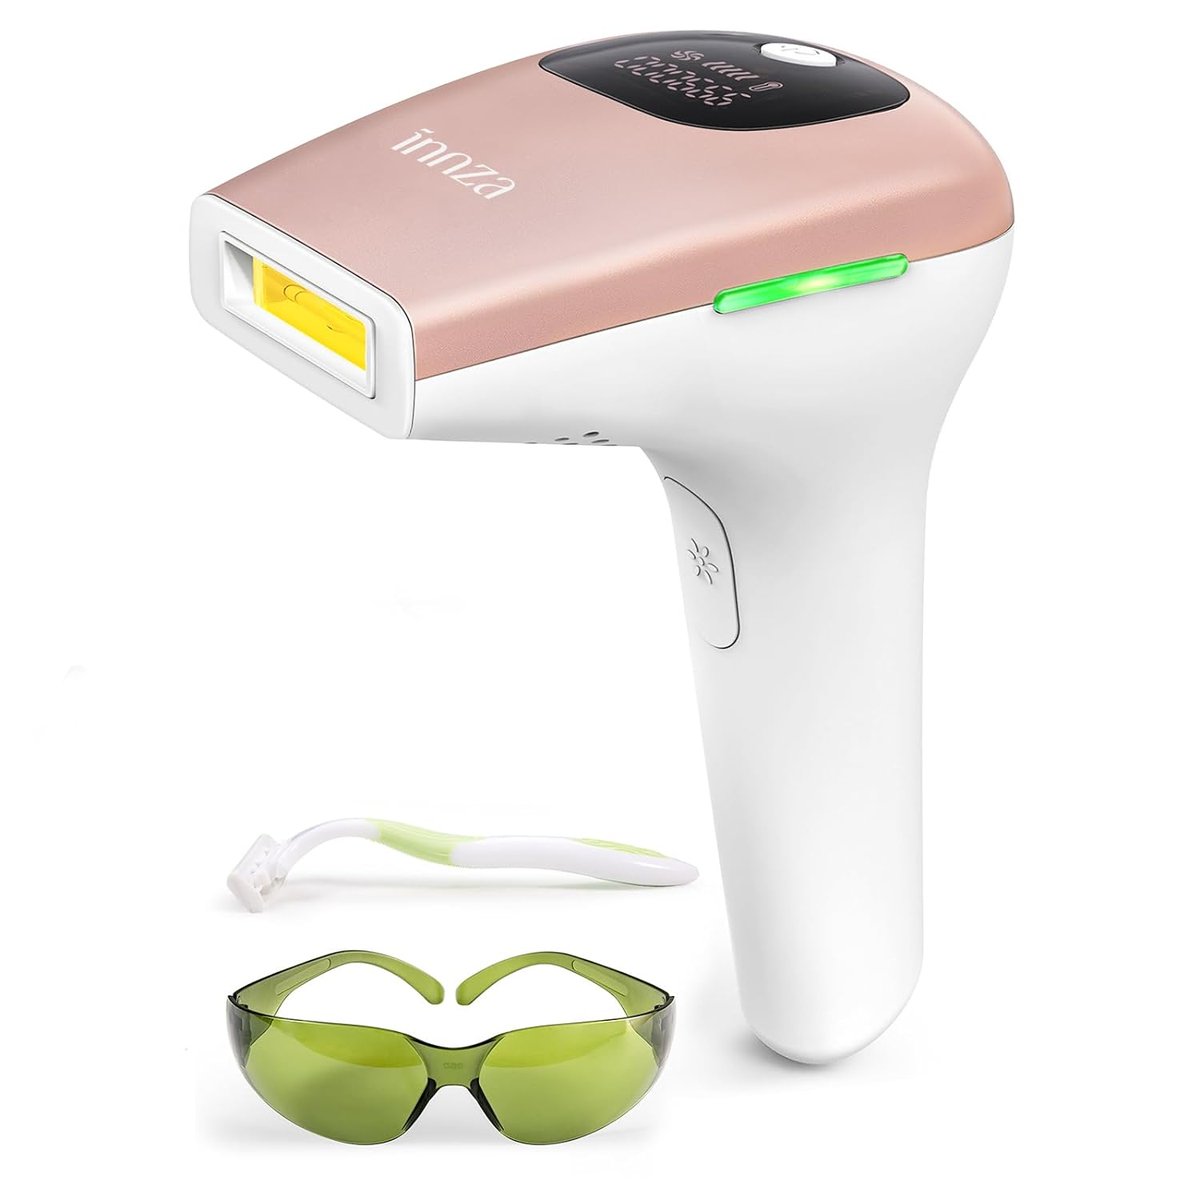 74 '/. off⭐️⭐️⭐️⭐️⭐️  IPL Hair Removal  Device
QP+ 9DG97YQ4
geni.us/zBUnN9
 👉 Discount  are subject to change or expire at any time (Ad)